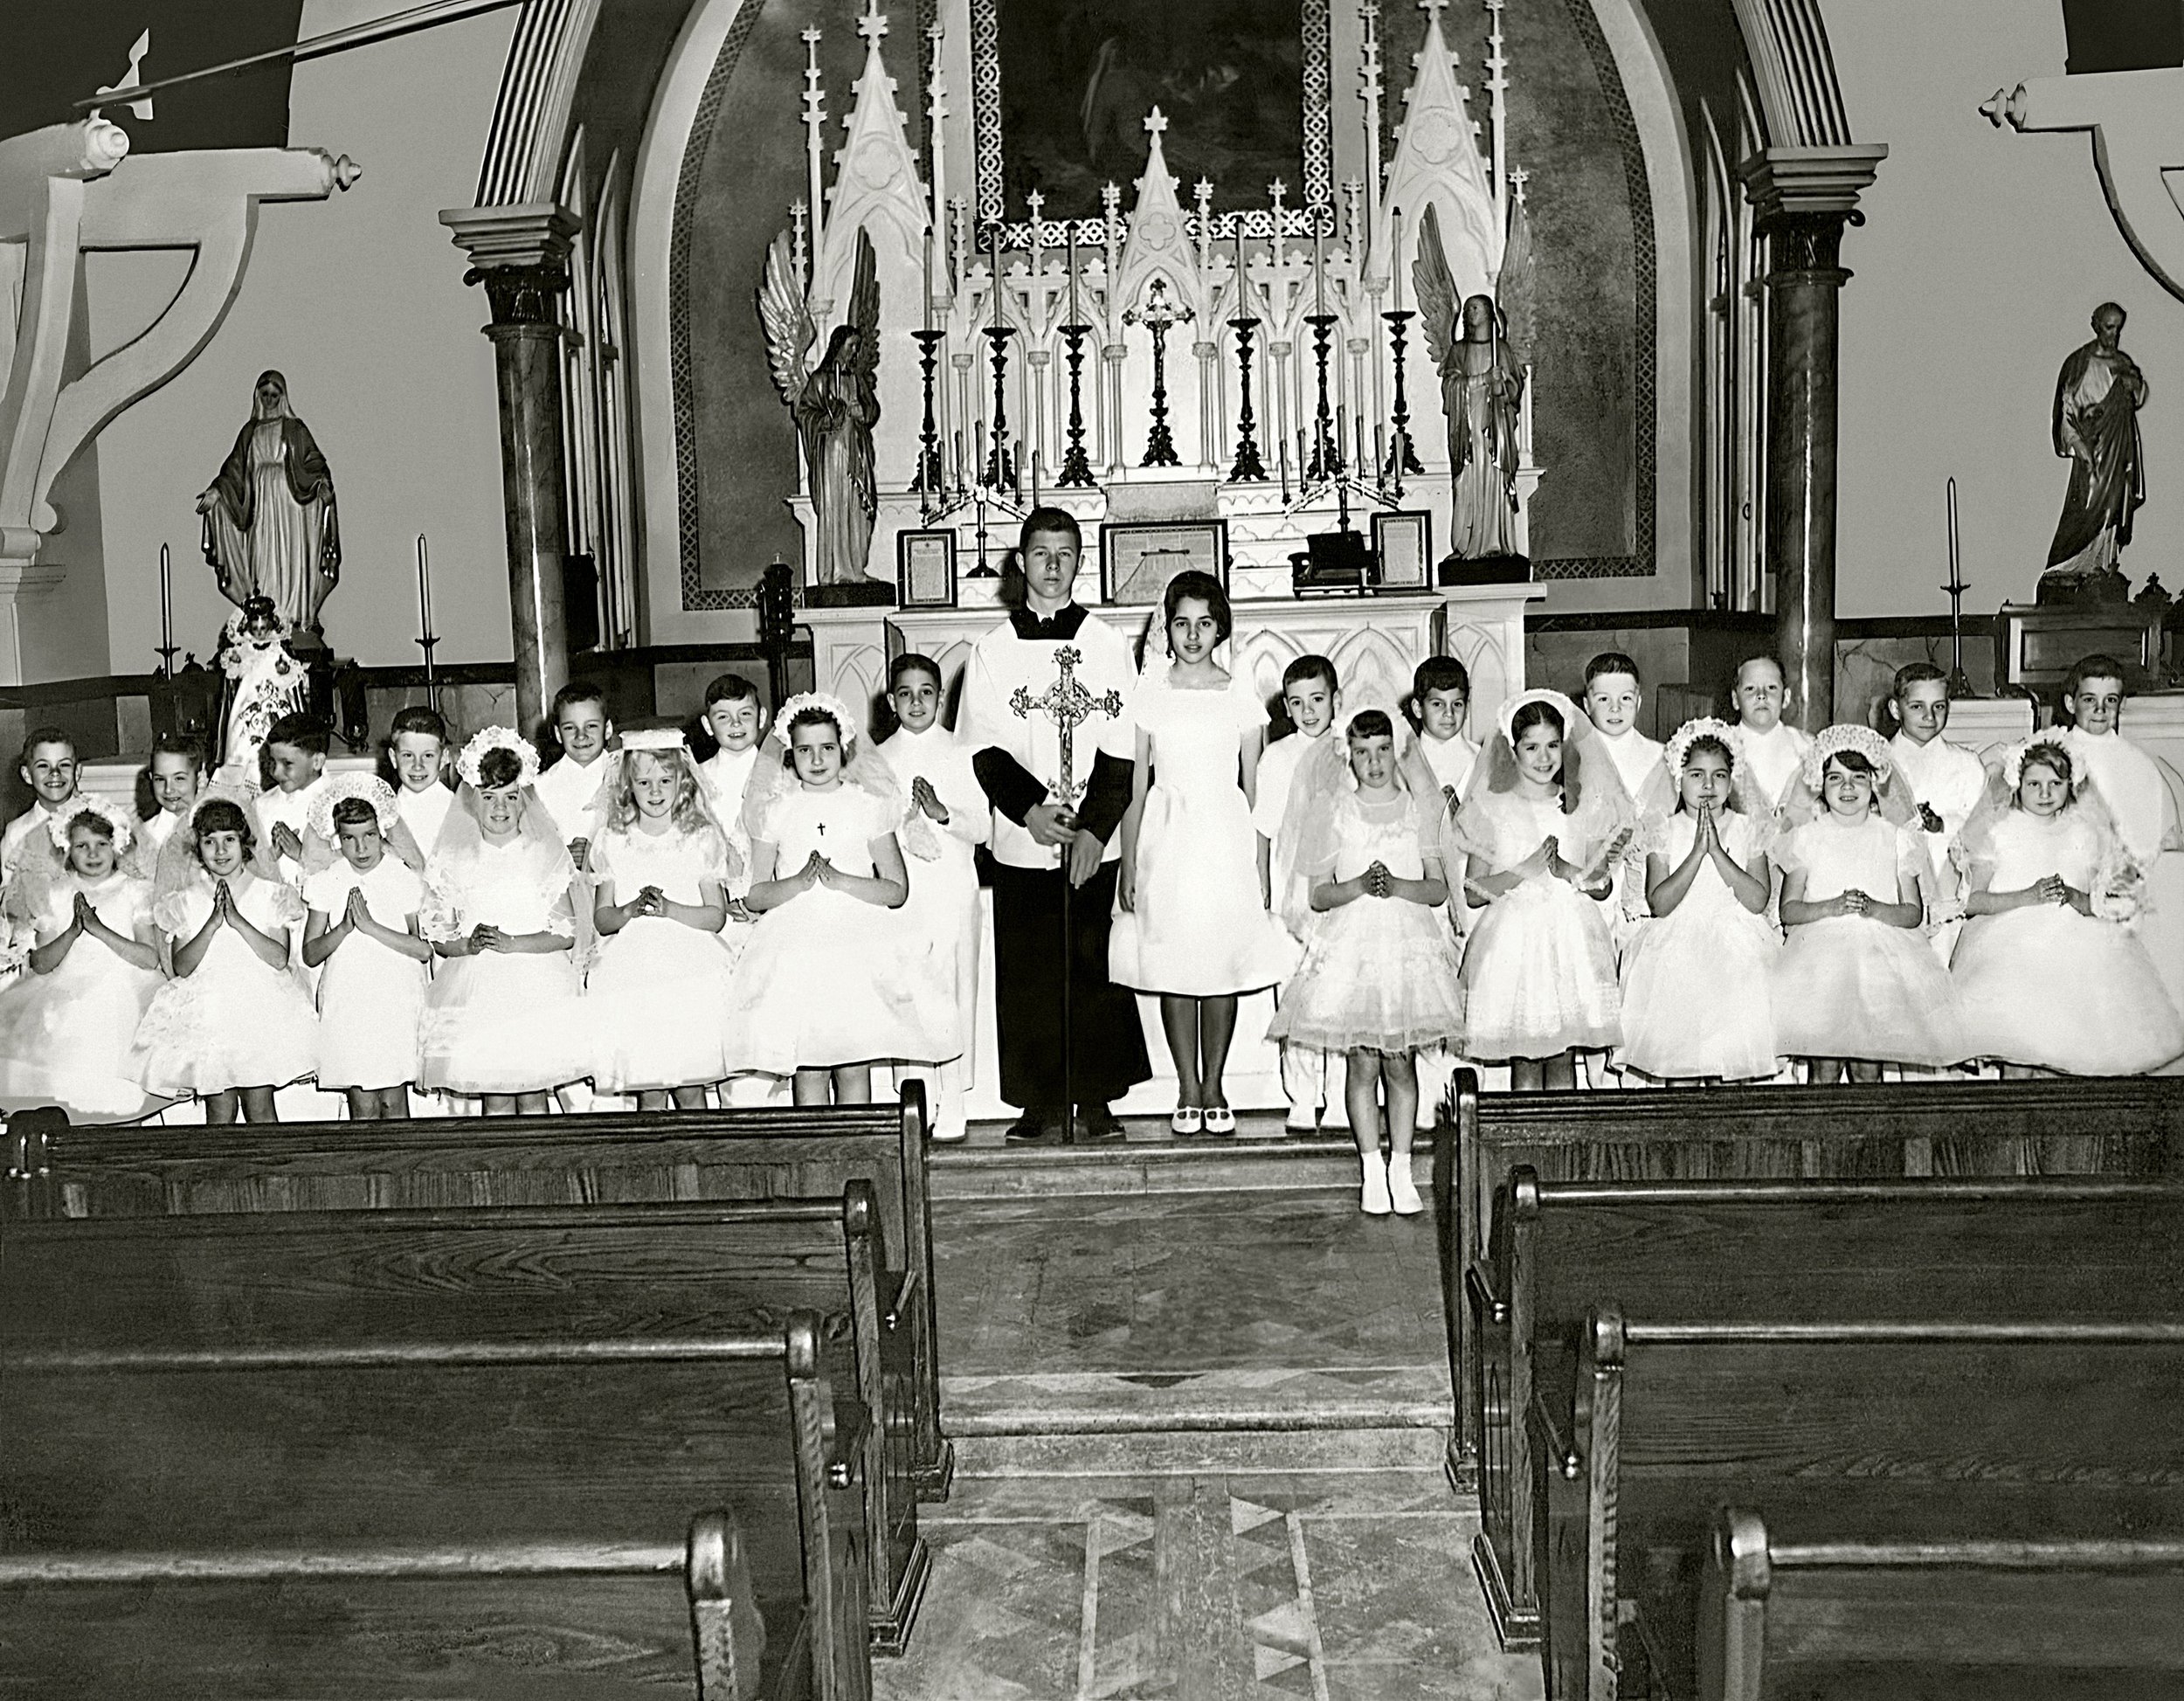 First Holy Communion Ceremony in 1966. The “Christ on the Cross” painting hangs above the altar before it was taken down.